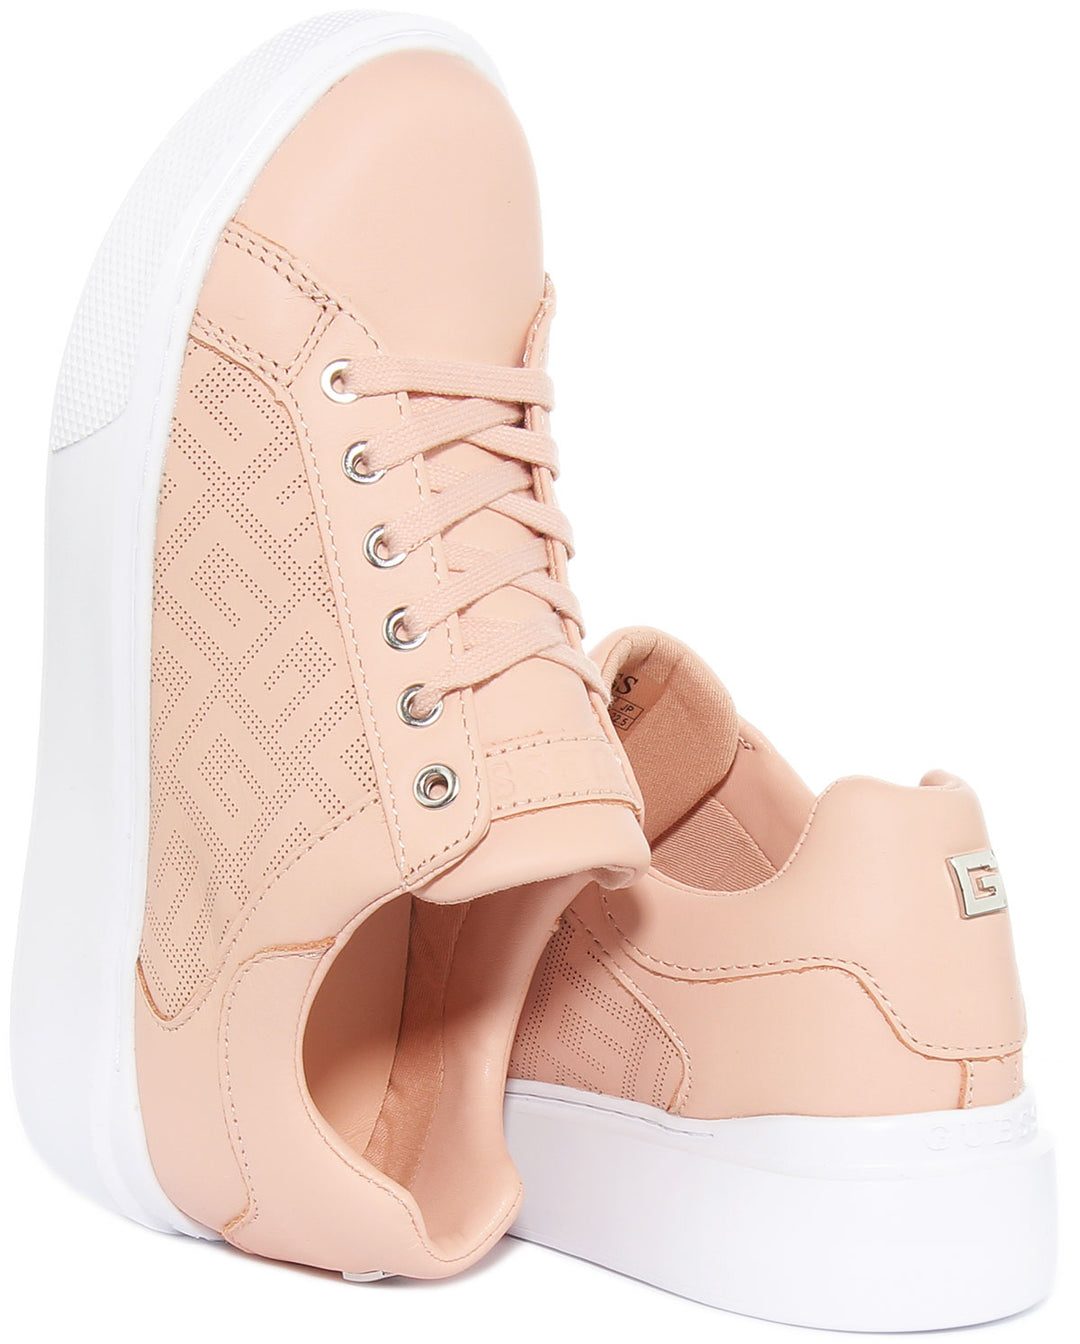 Guess Ivee Platform In Pink For Women